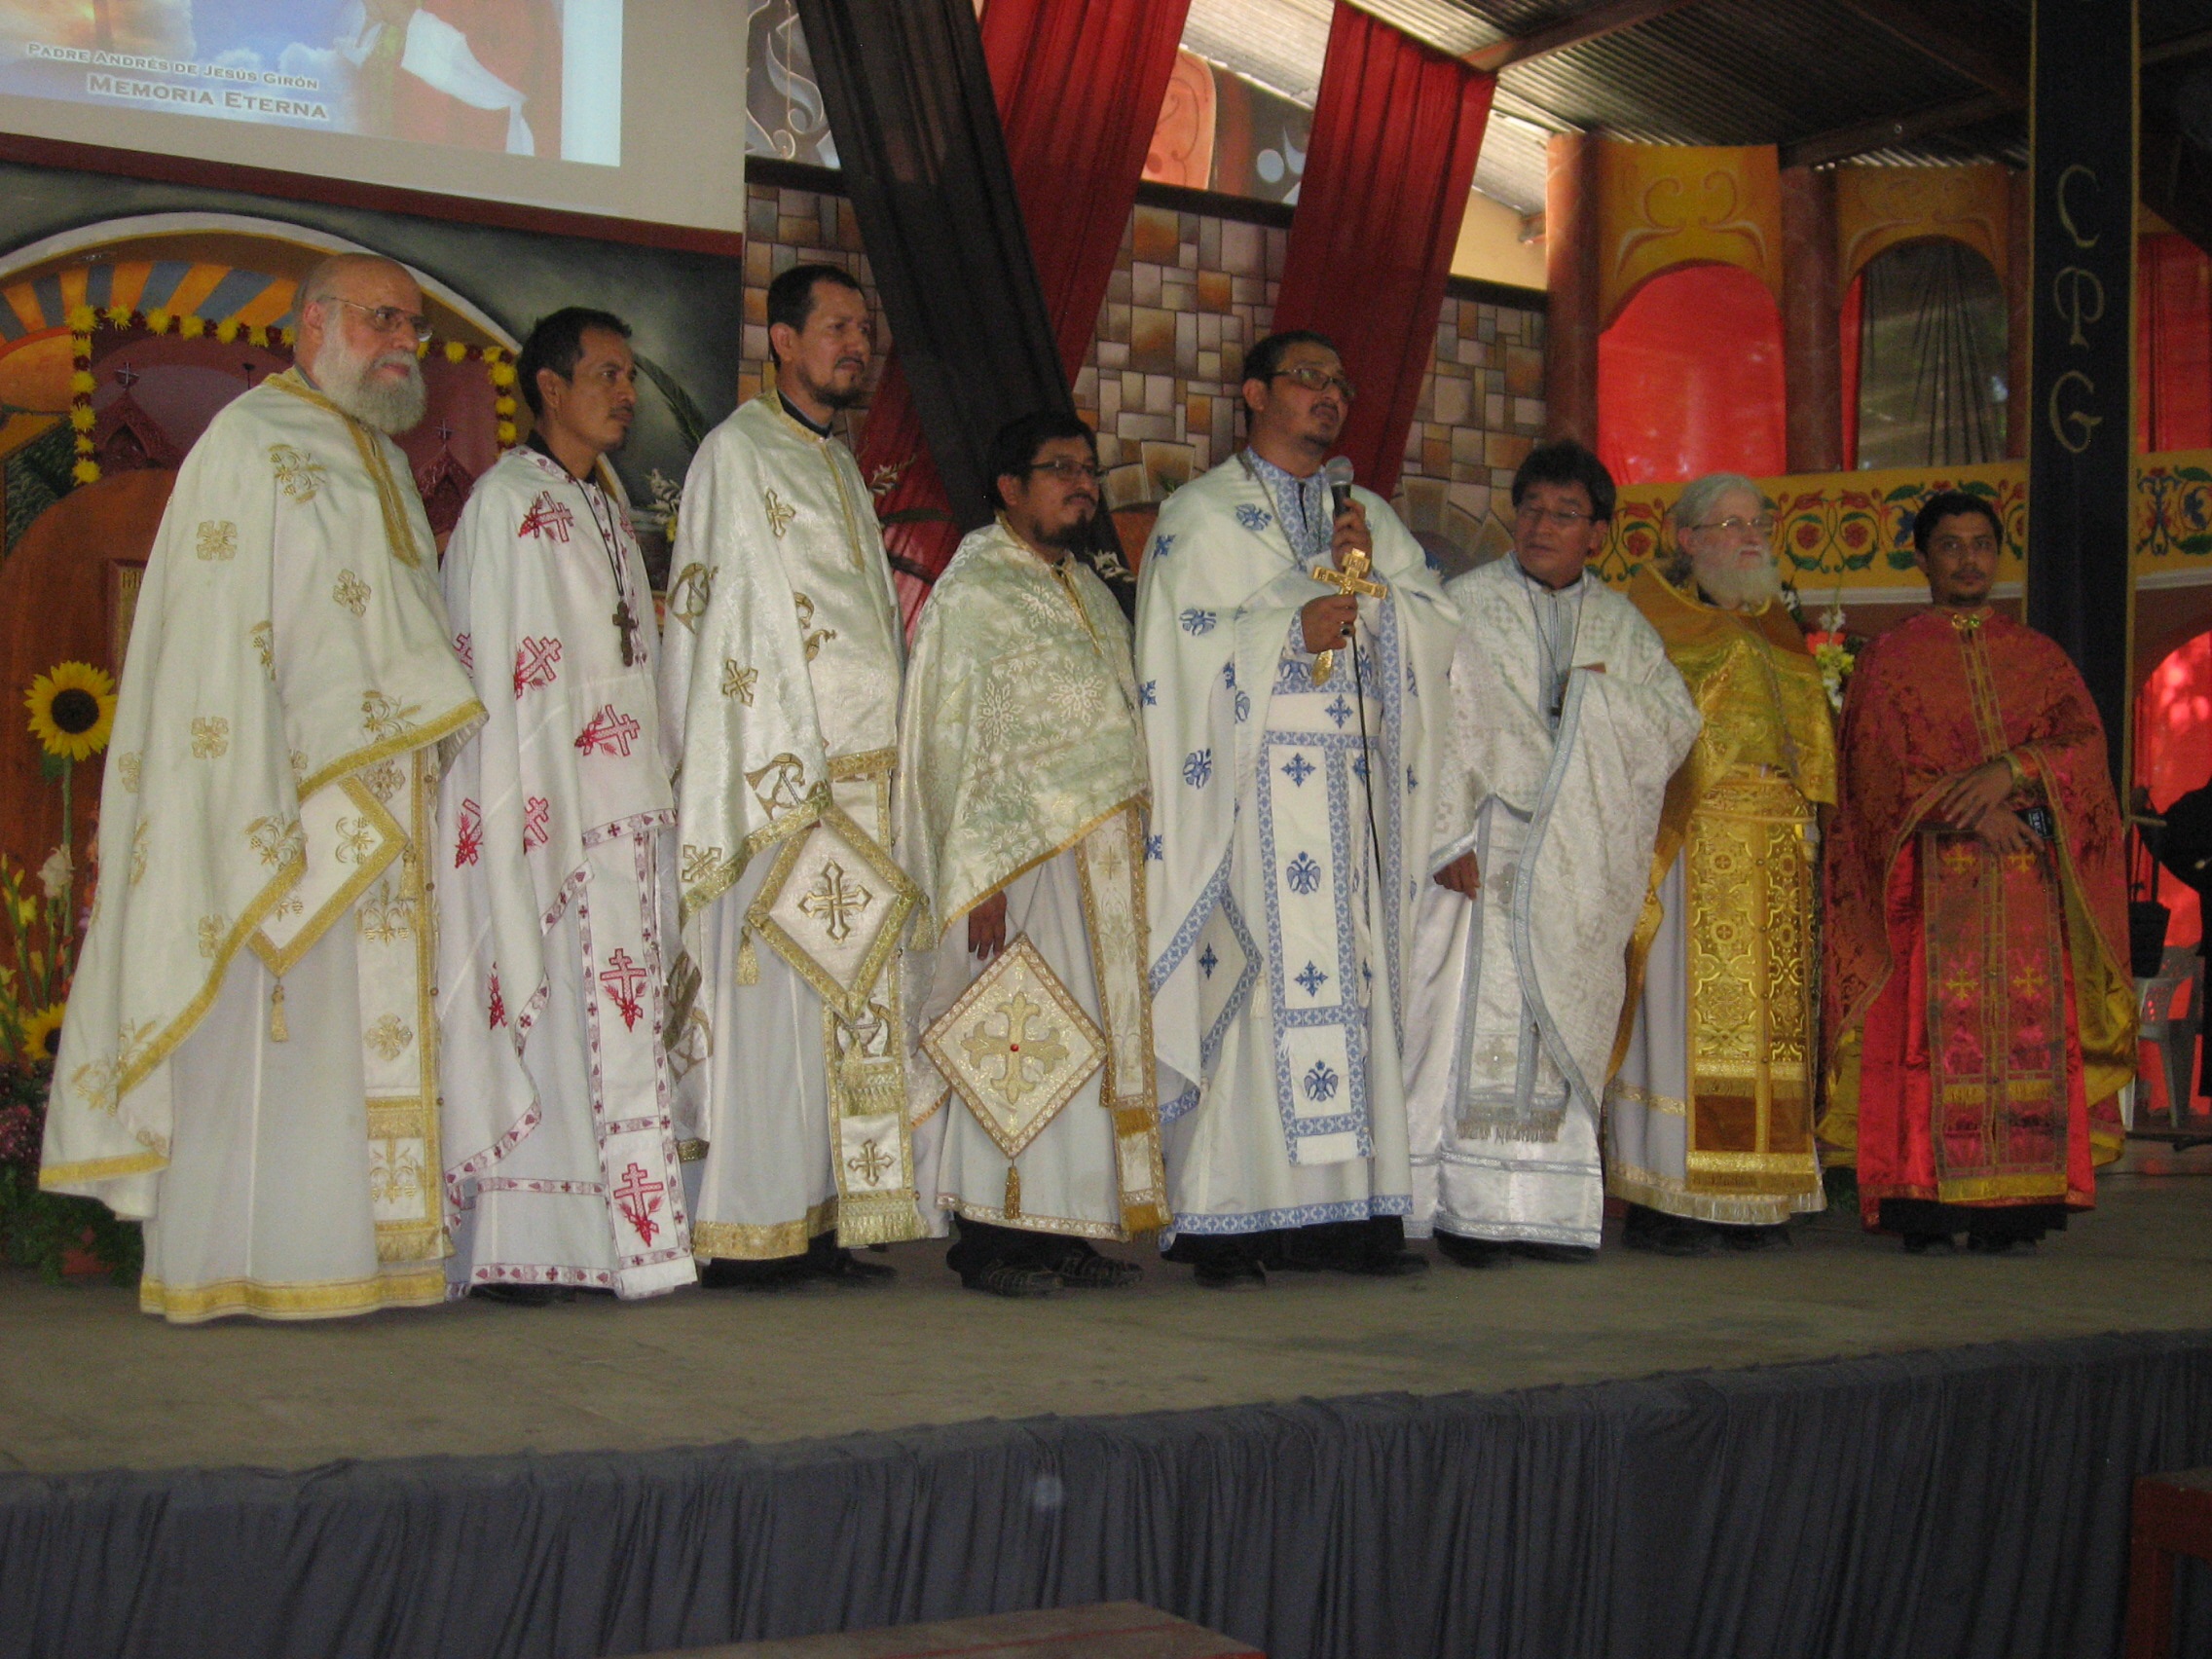 Fr. Fernando to succeed Fr. Andrés as the leader of the Mayan Orthodox Church